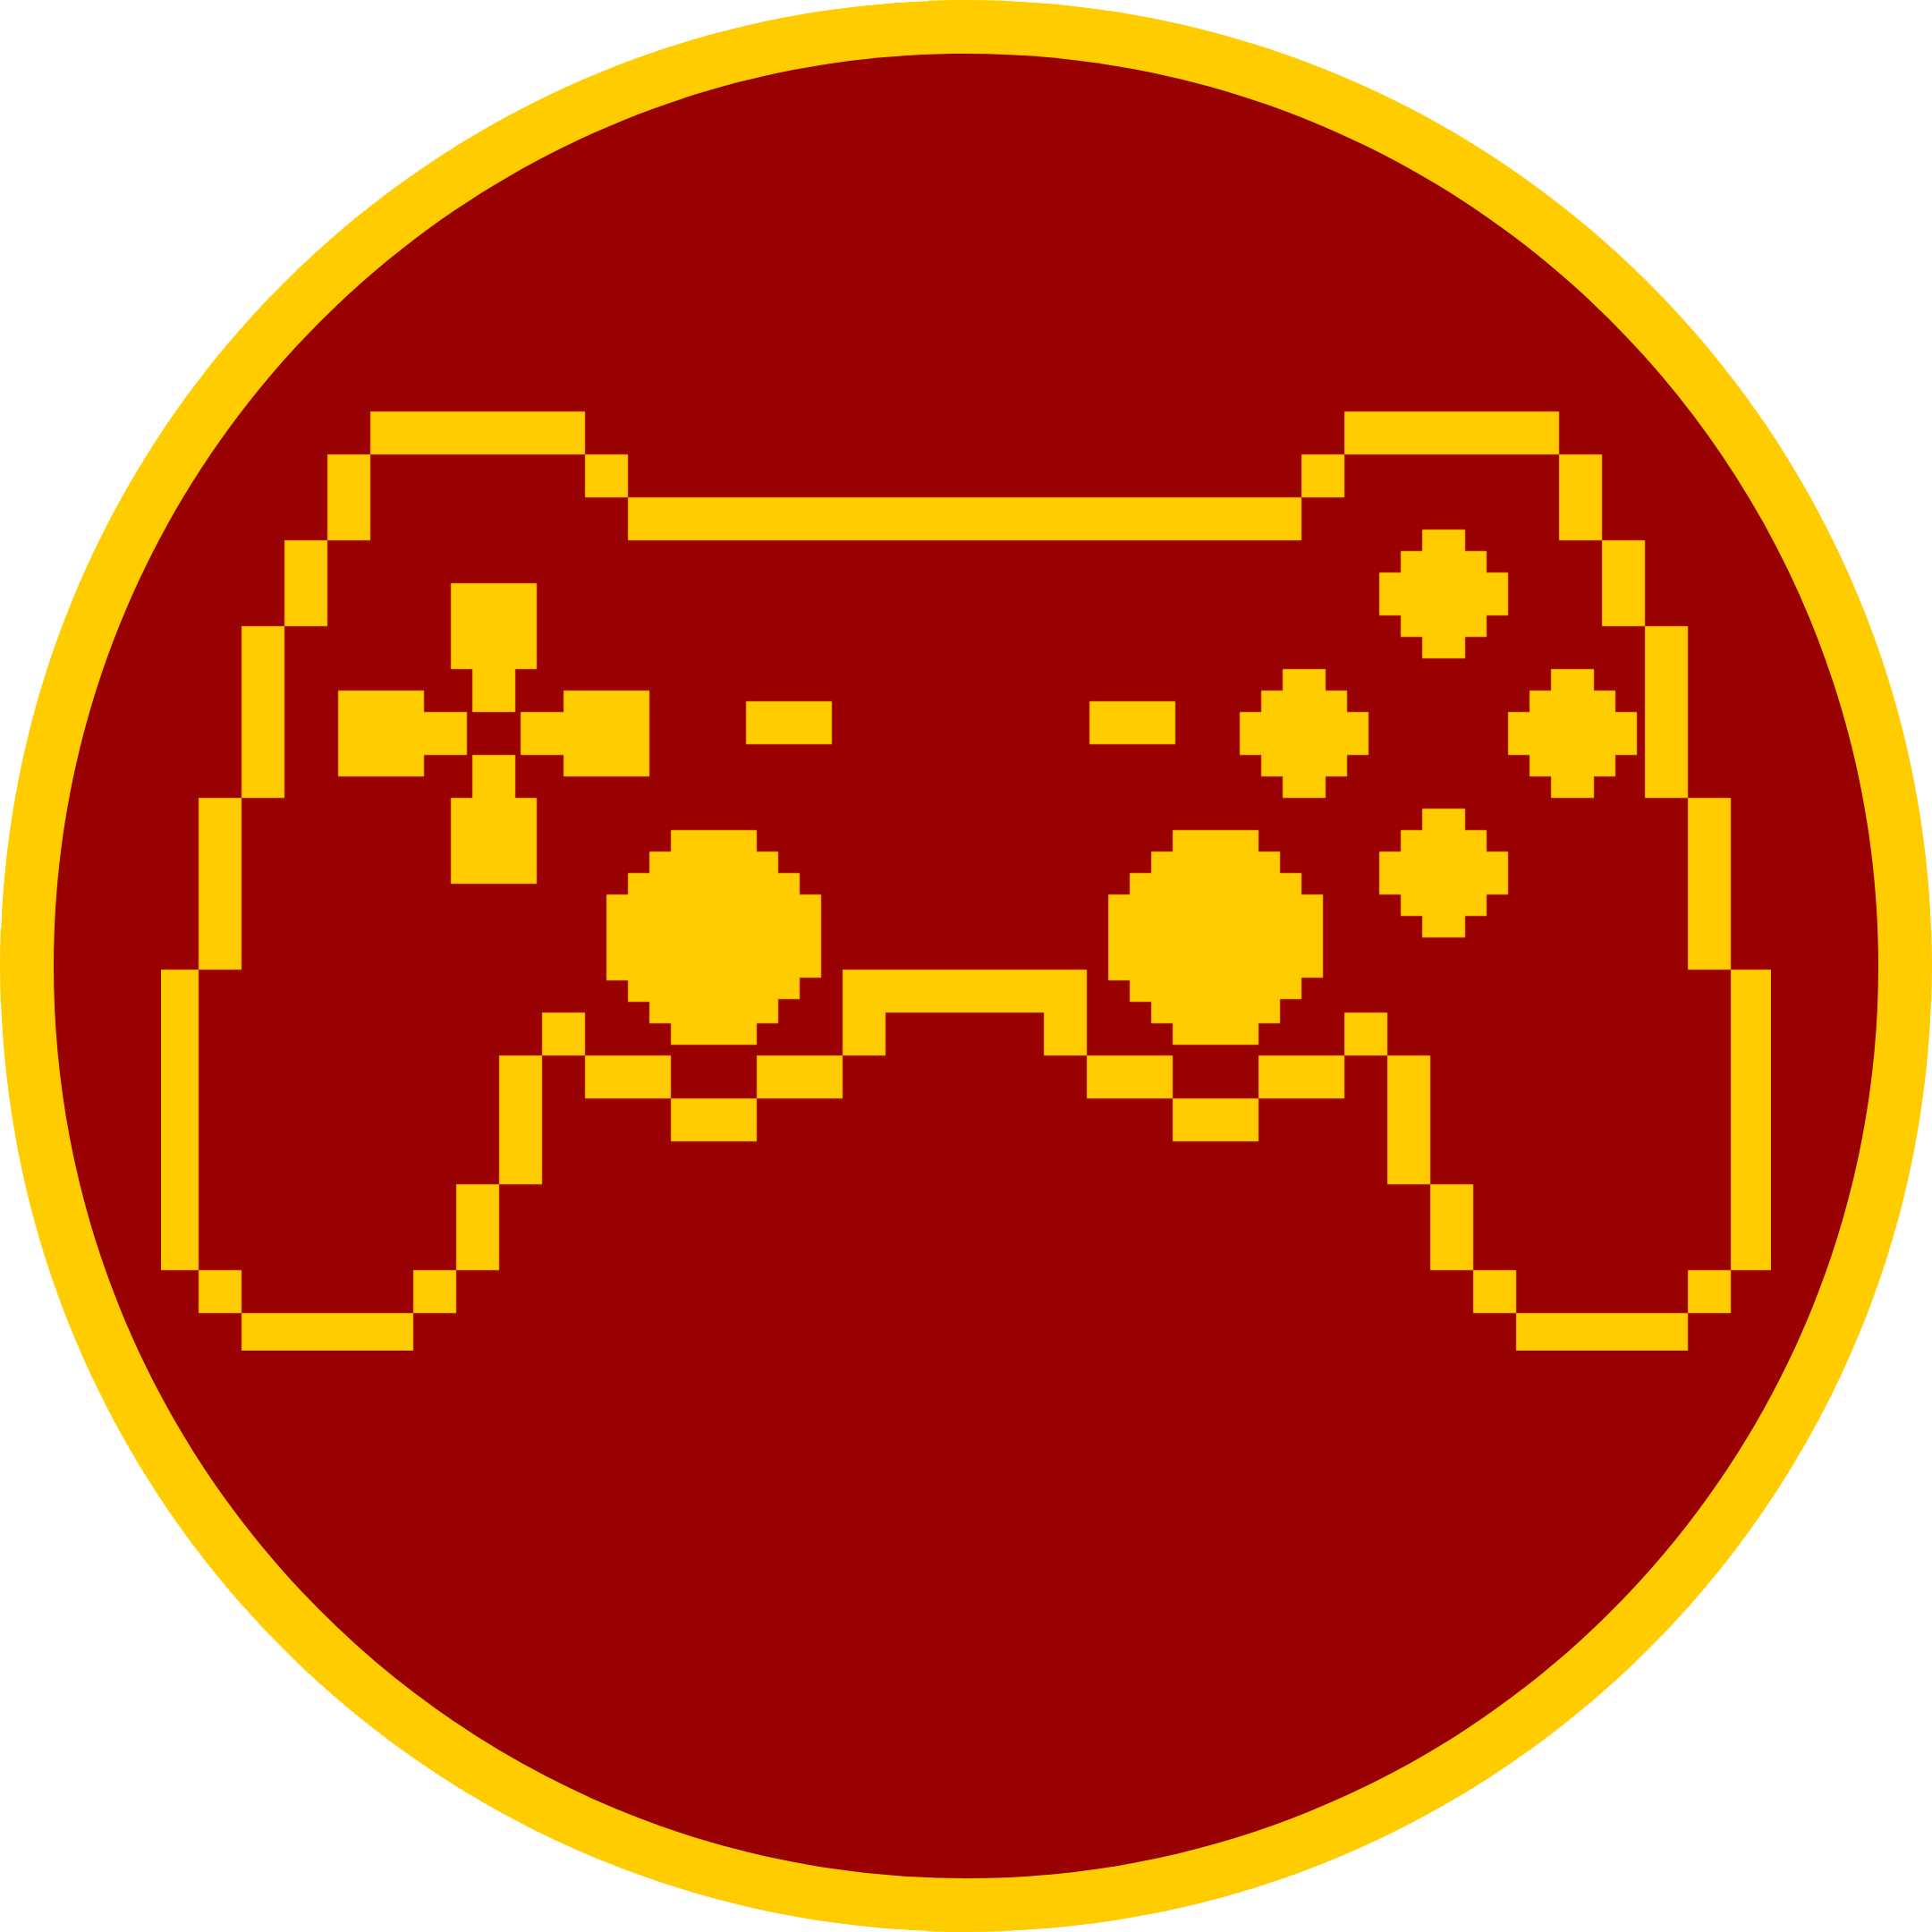 A Video Game Controller In A Circle